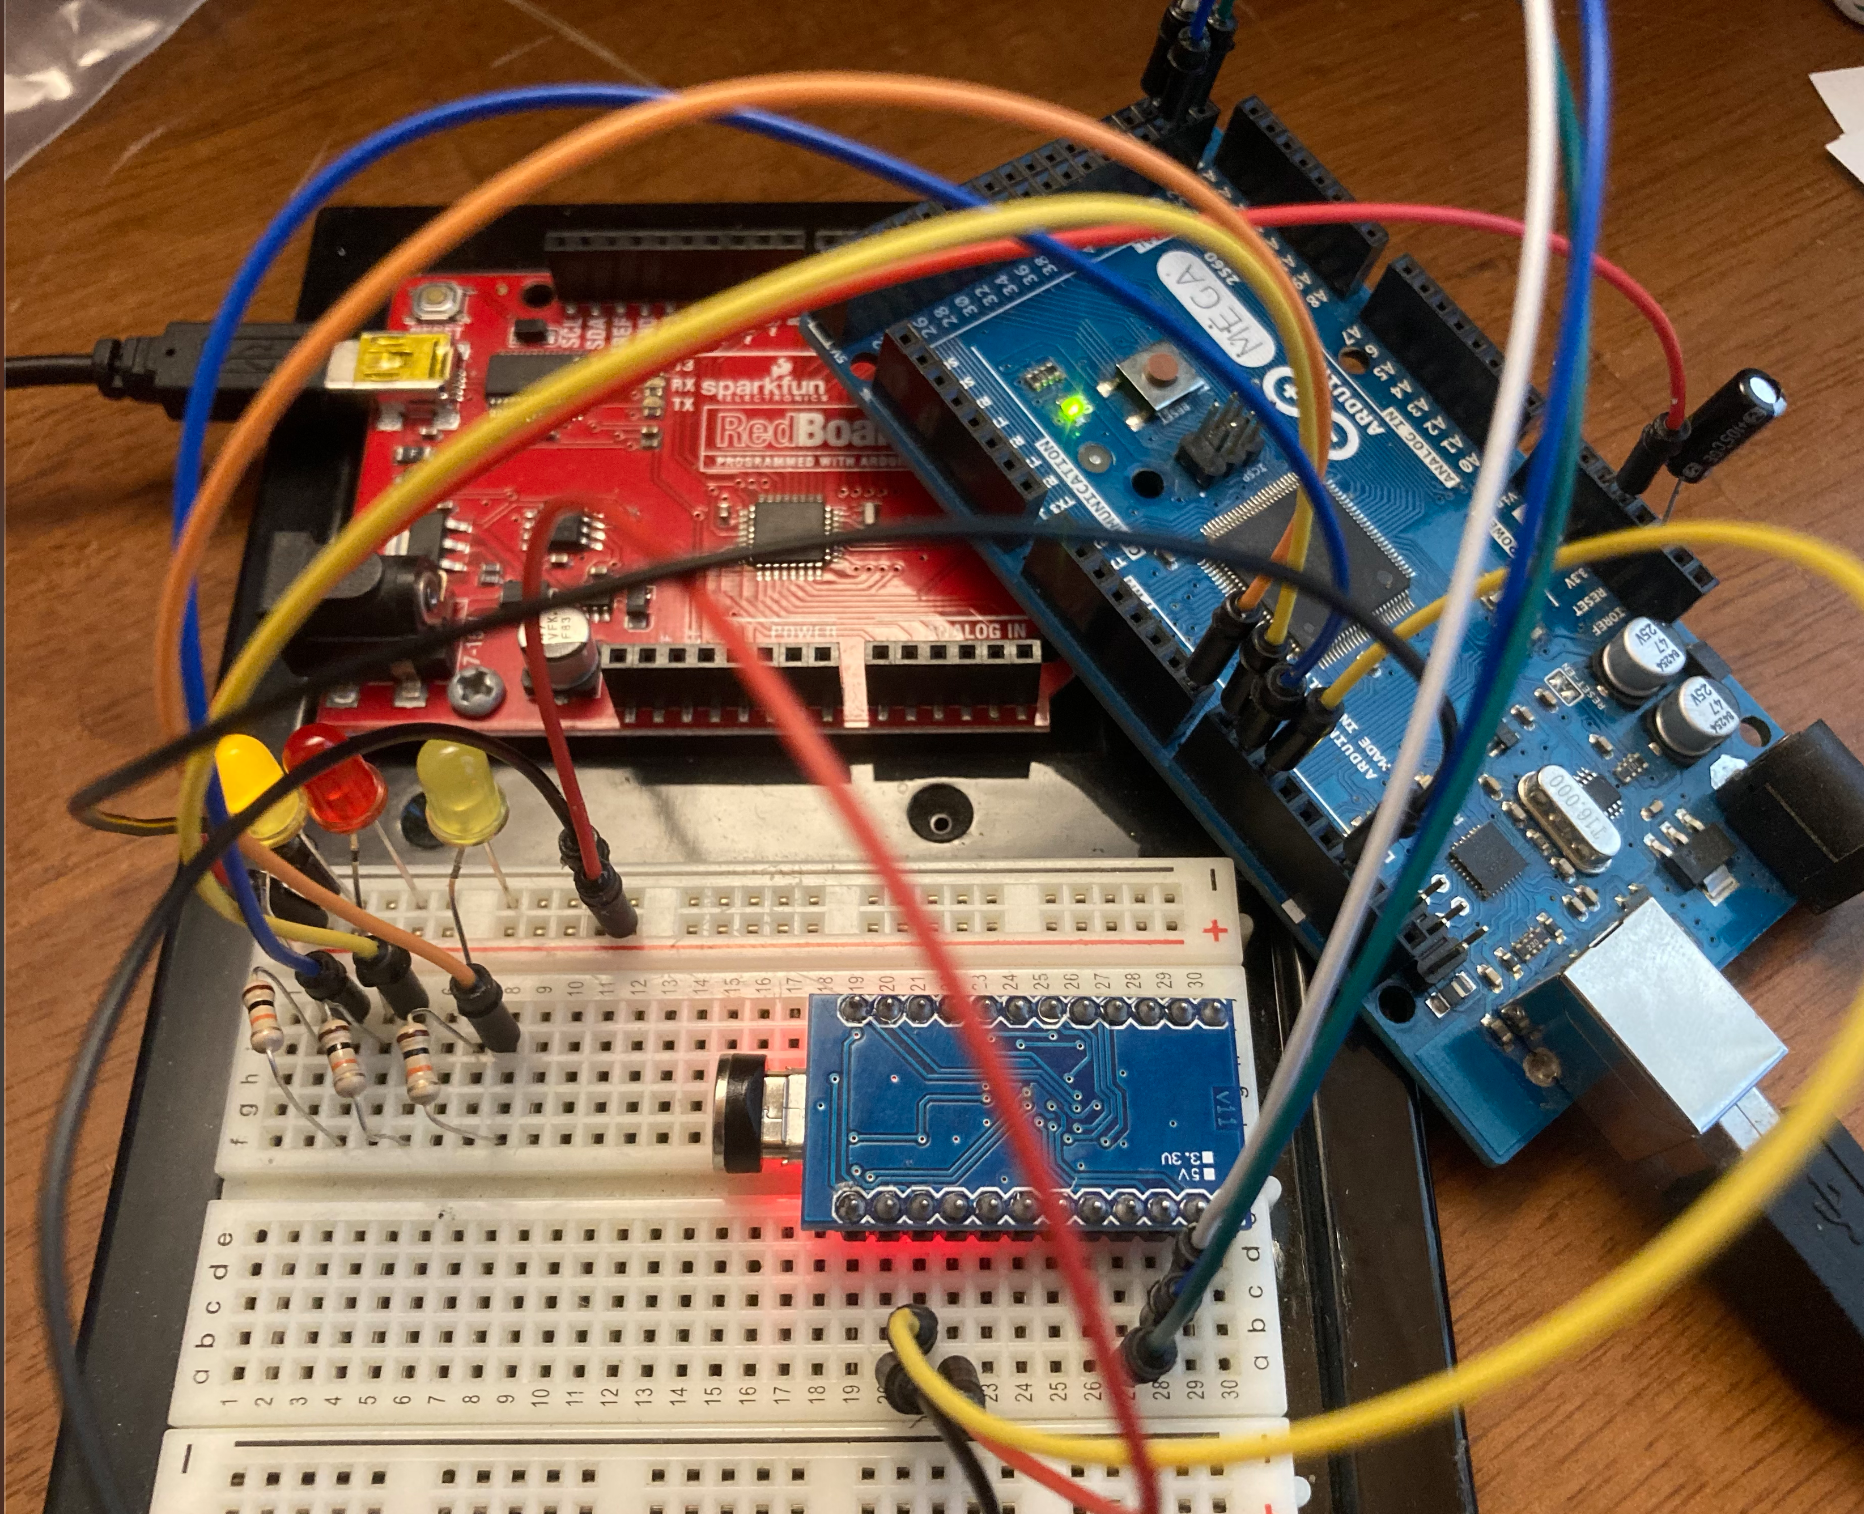 My workbench of shame. An arduino being used as an ISP programmer for a promicro plugged into a breadboard attached to a completely unrelated board.